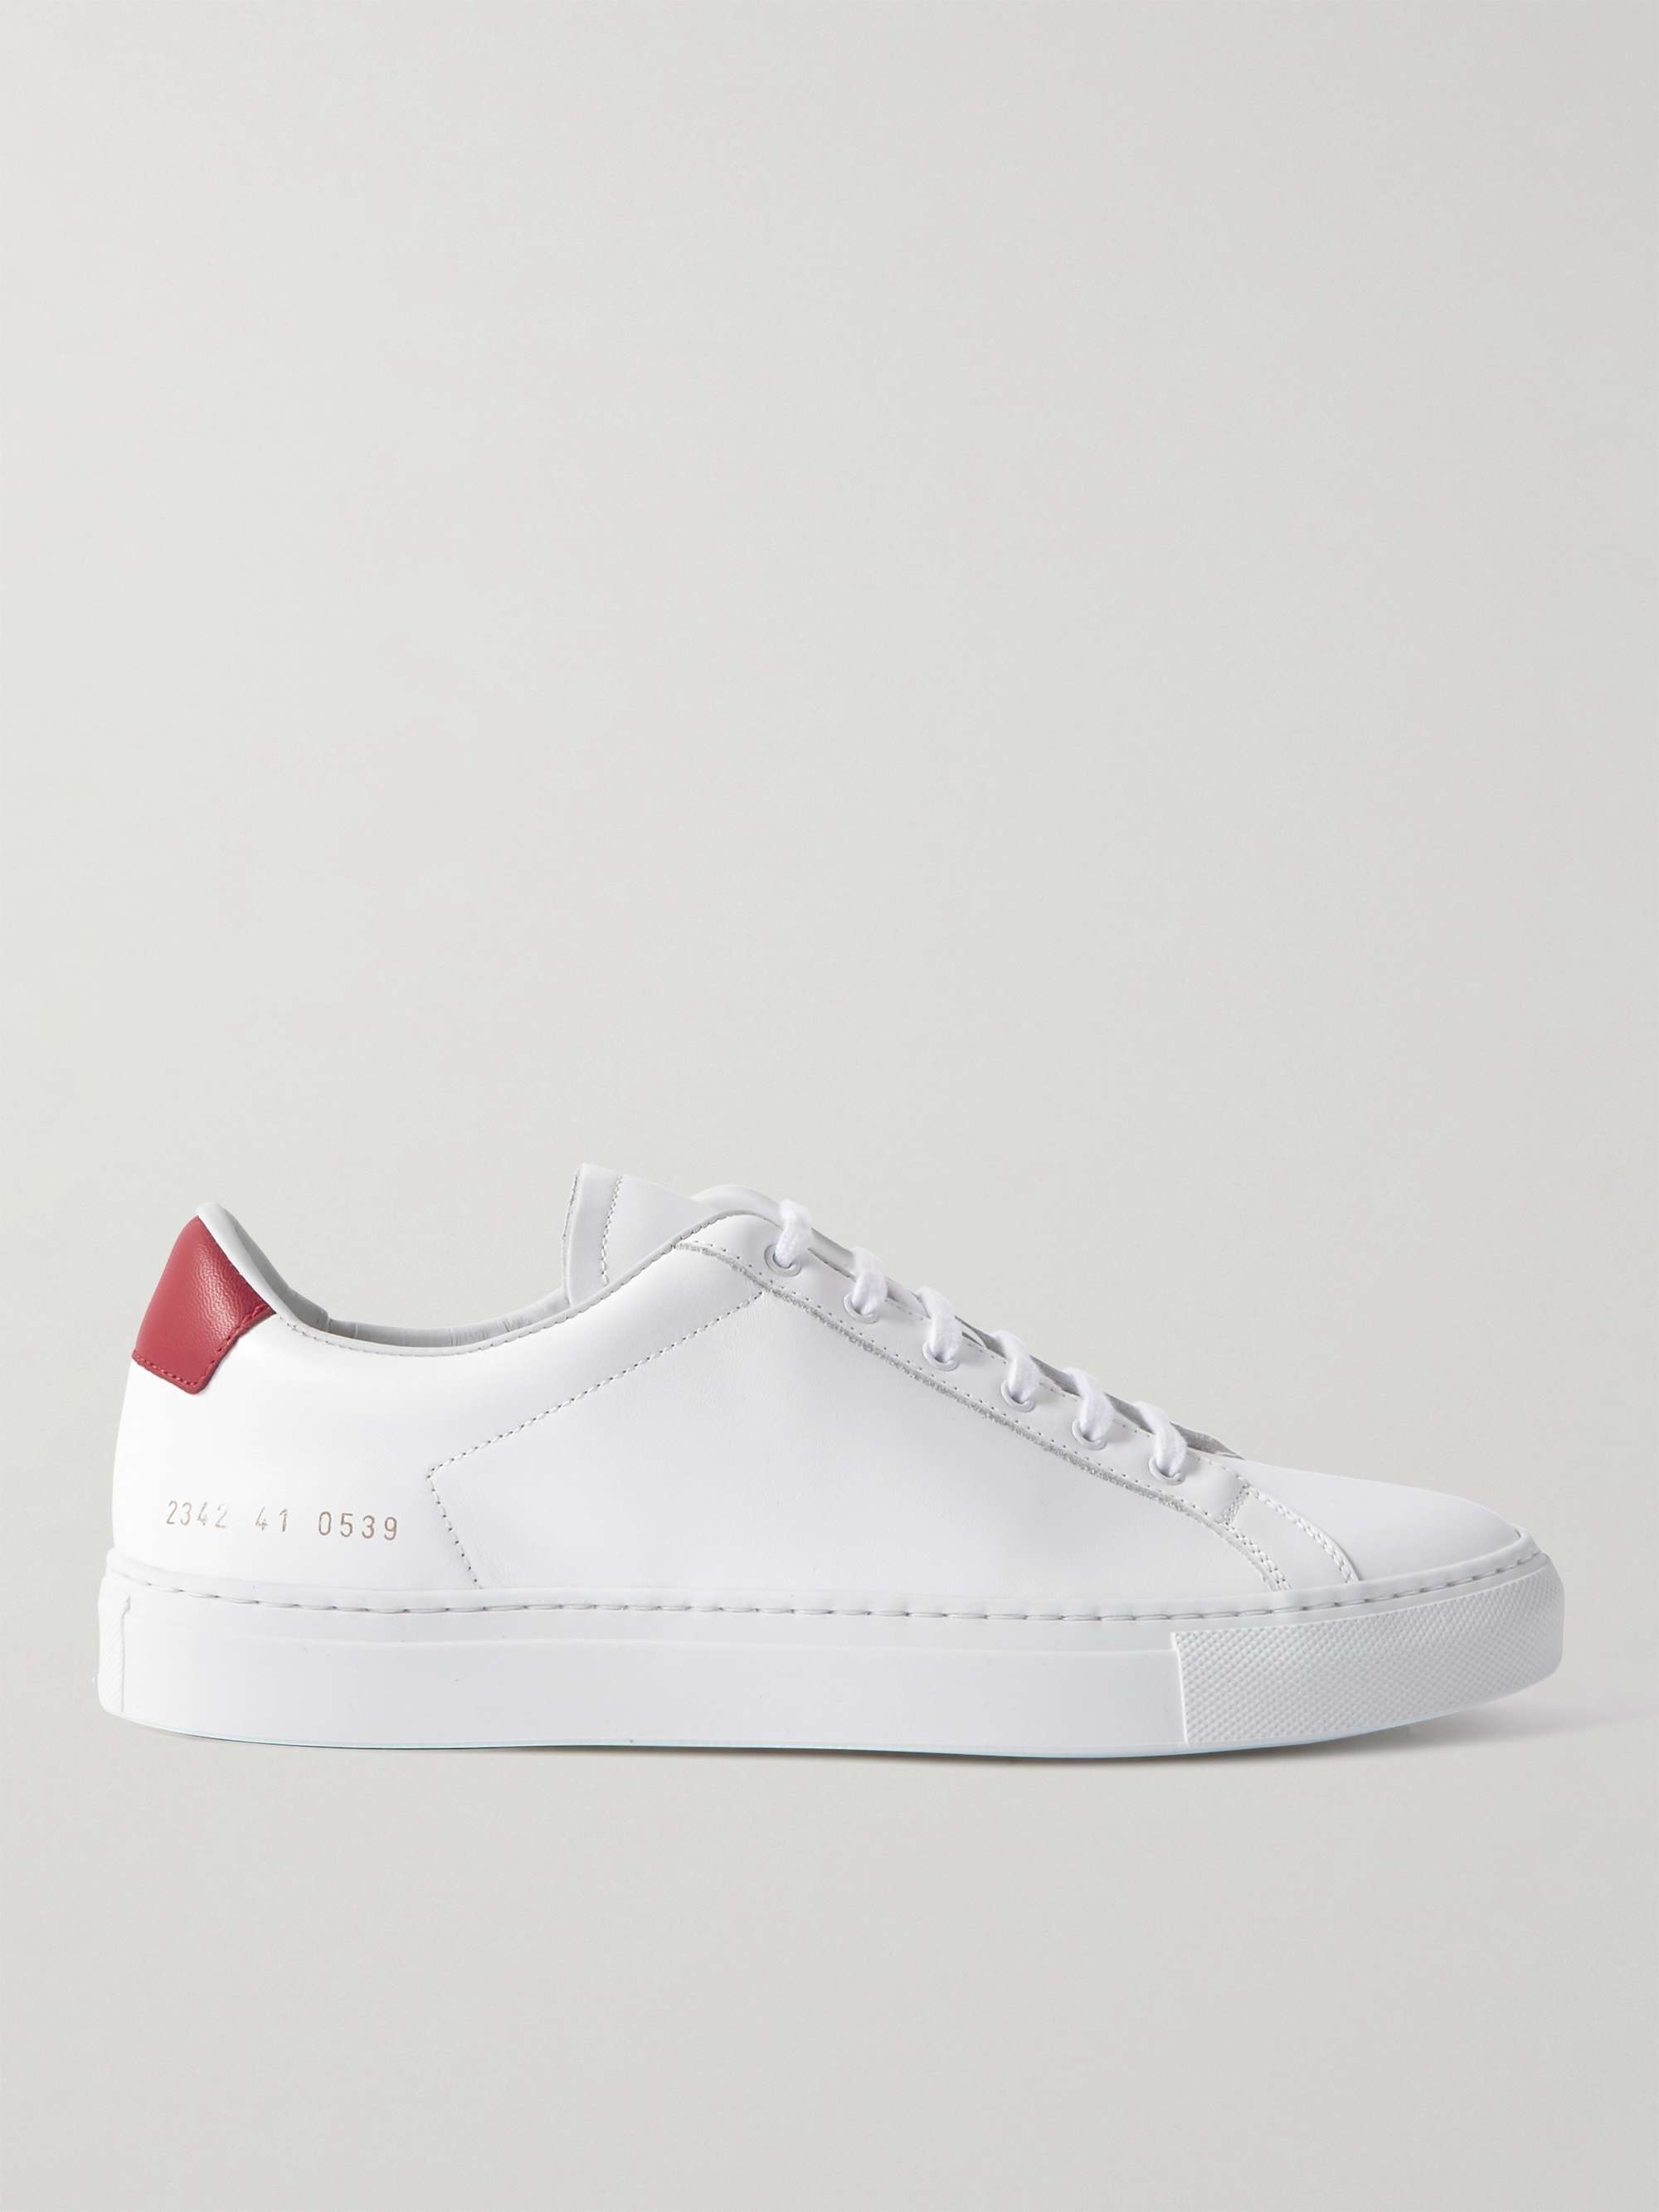 Sneakers COMMON PROJECTS 45 white Sneakers Common Projects Men Men Shoes Common Projects Men Sneakers Common Projects Men 